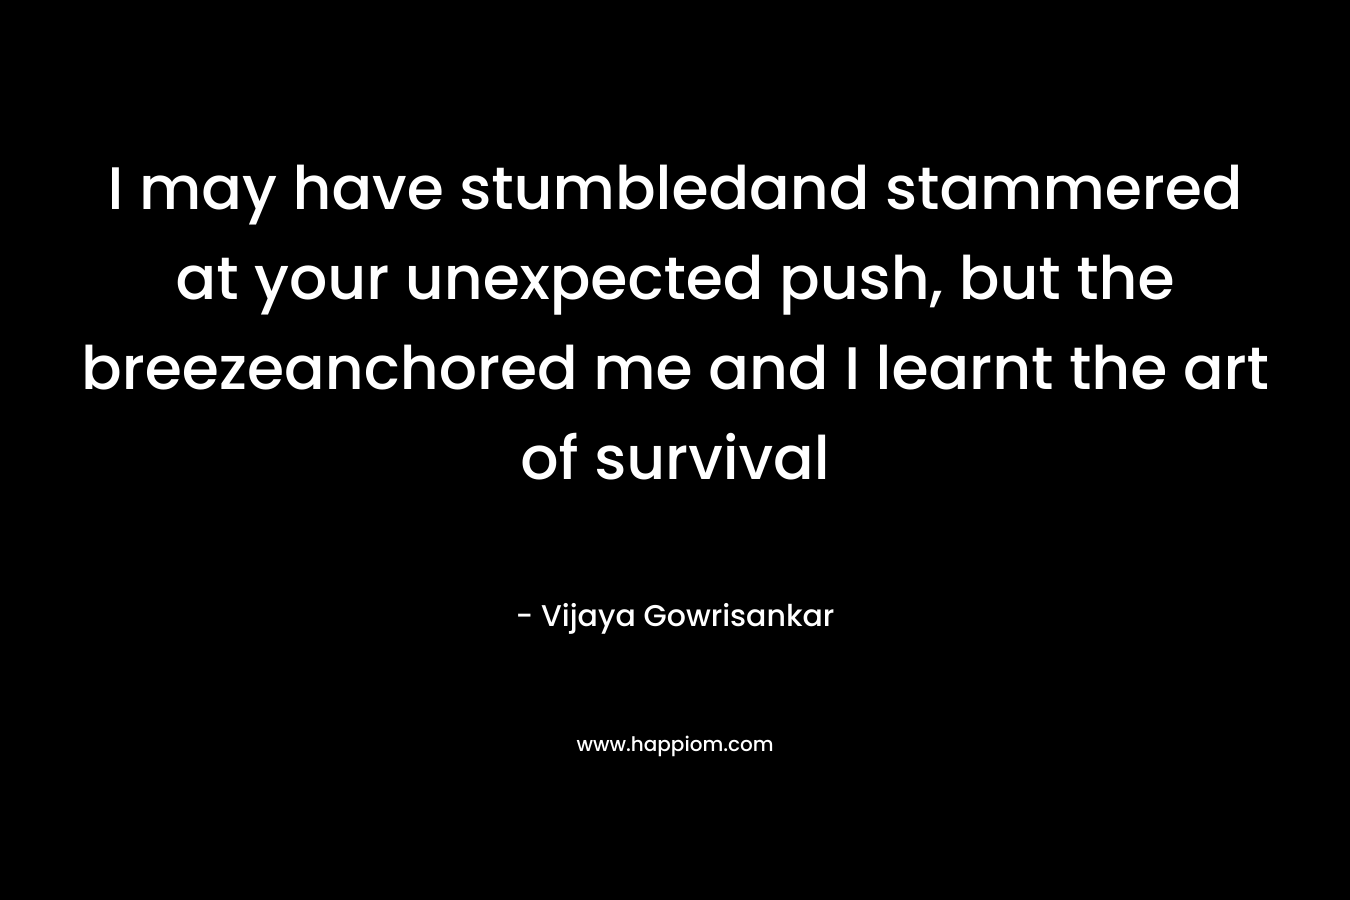 I may have stumbledand stammered at your unexpected push, but the breezeanchored me and I learnt the art of survival – Vijaya Gowrisankar